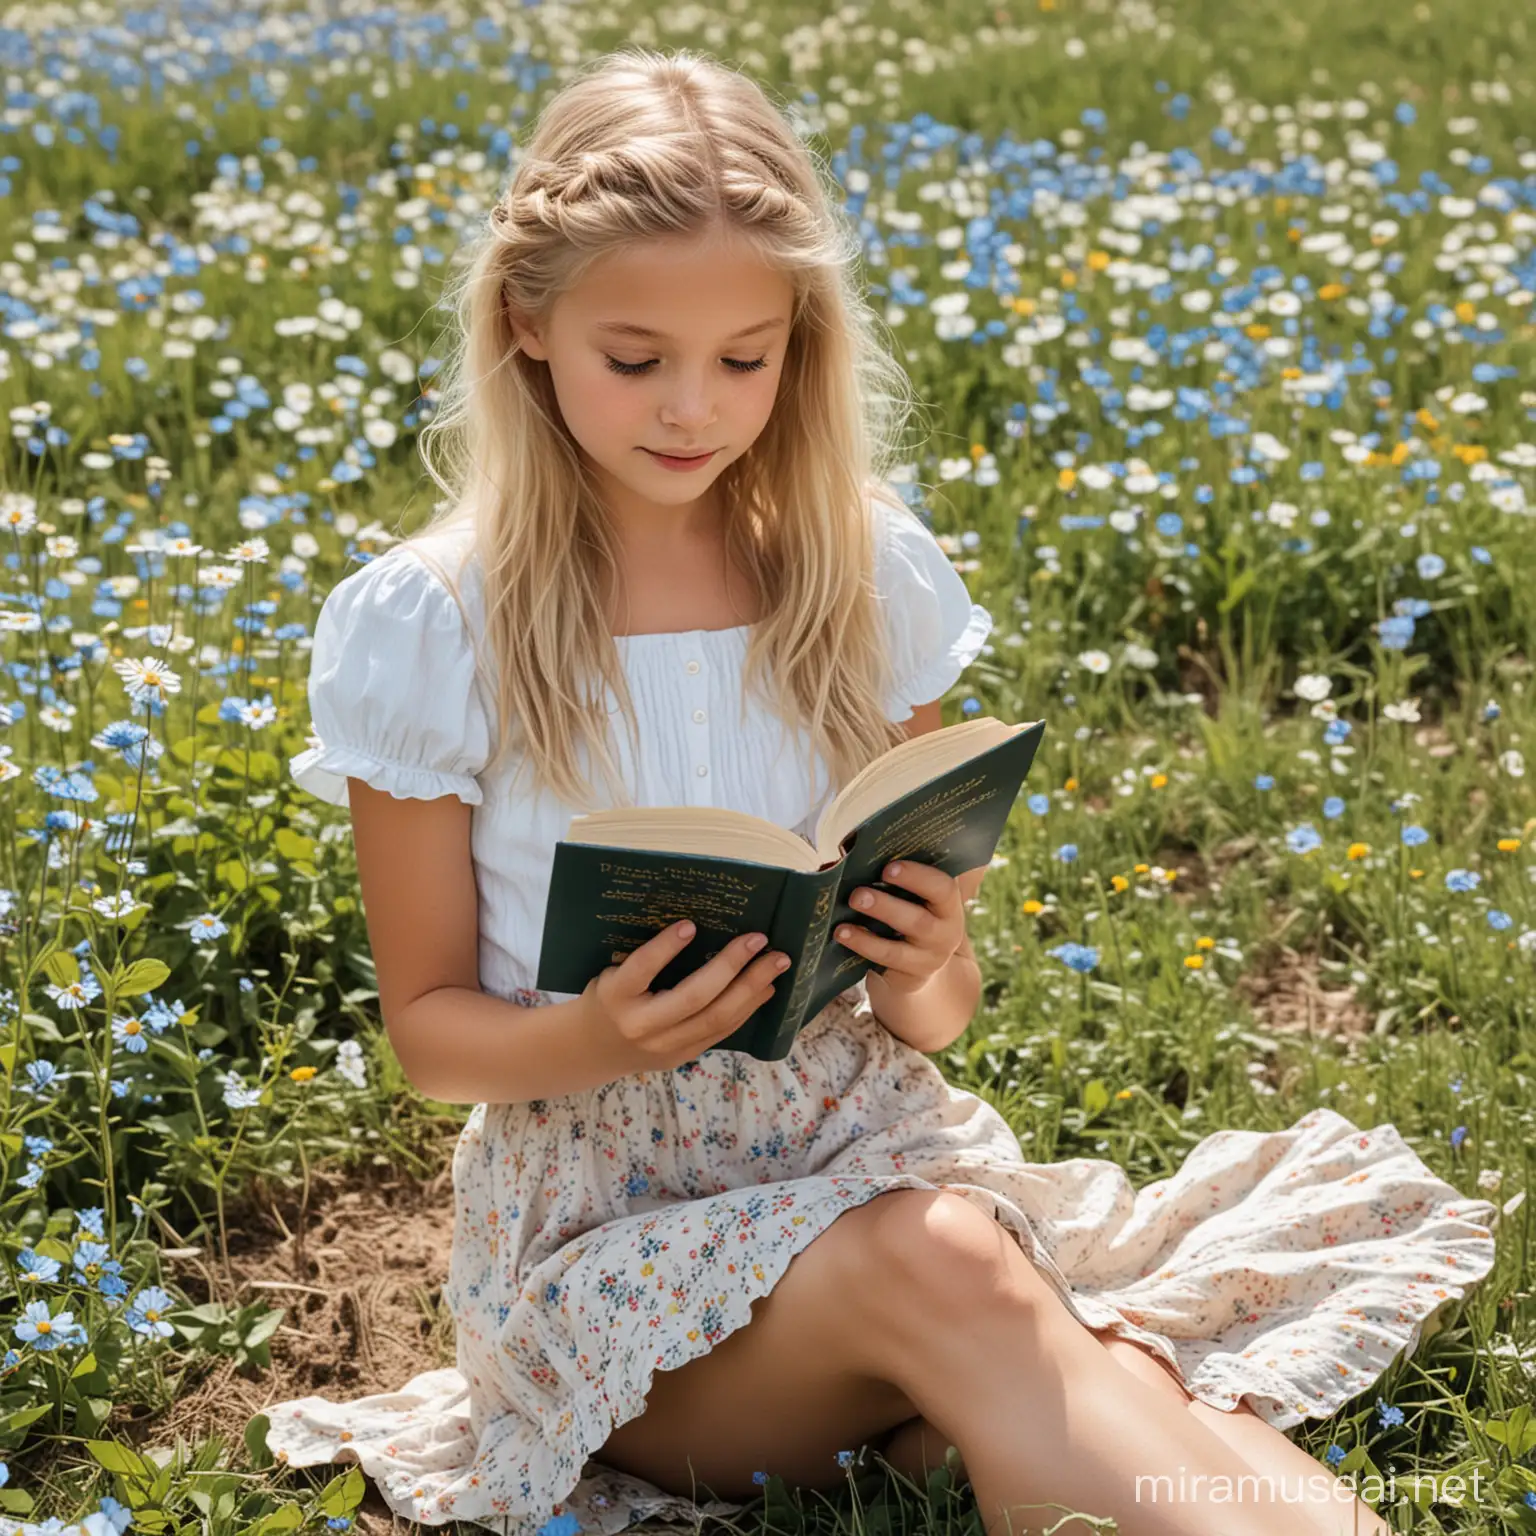 a young girl with blonde hair and blue eyes is sitting on a flower field reading a book. she is wearing a short skirt and she has bare feet